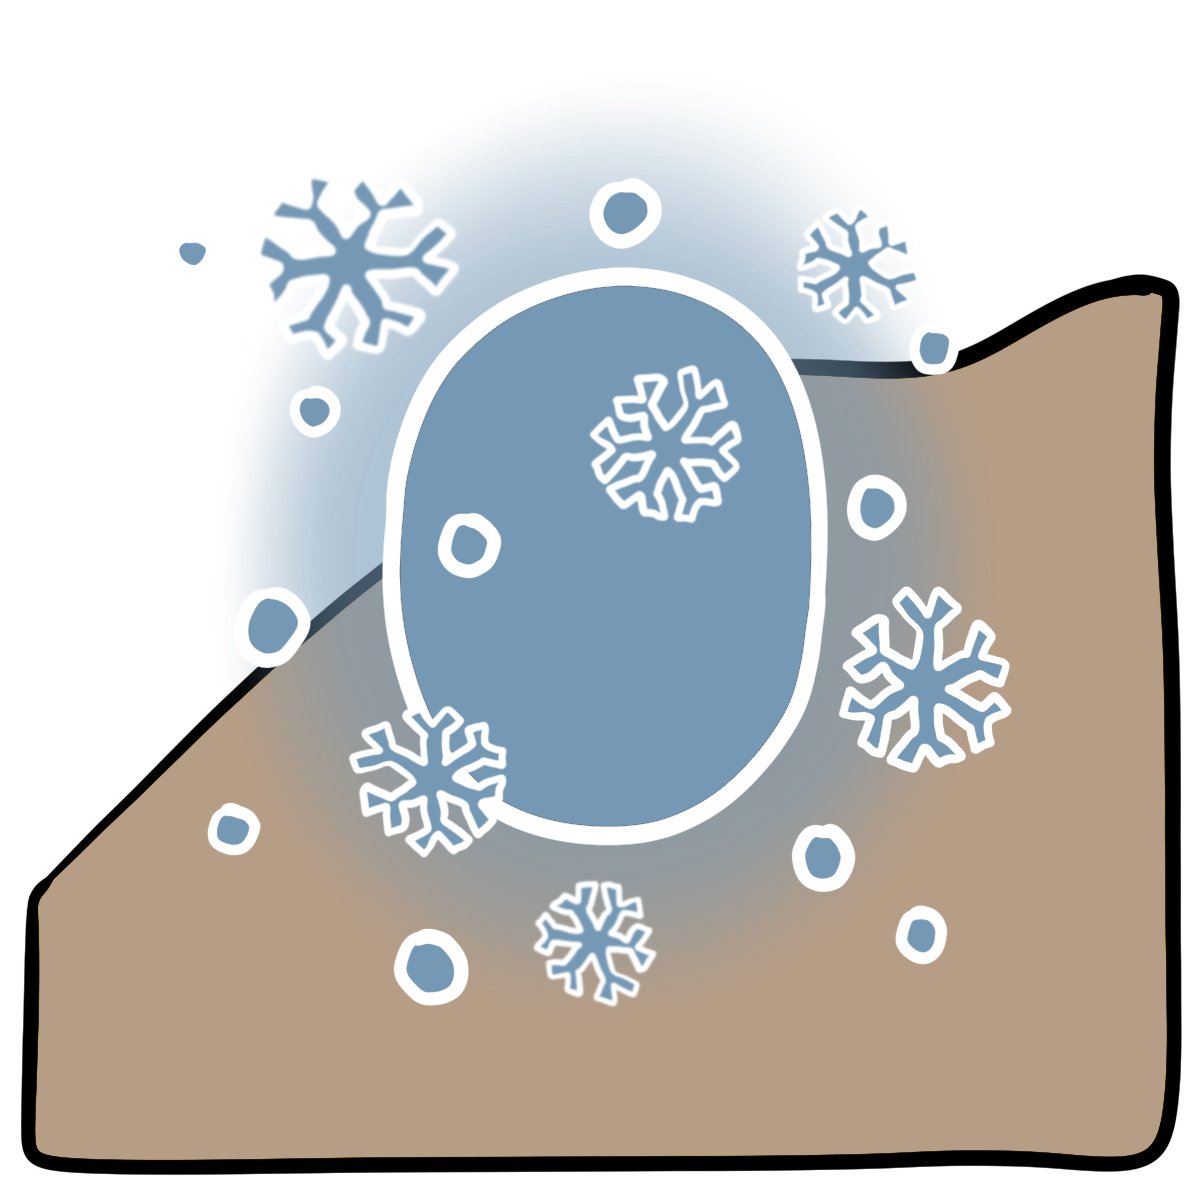 Light blue oval with snowflakes around it. Curved beige skin fills the bottom half of the background.